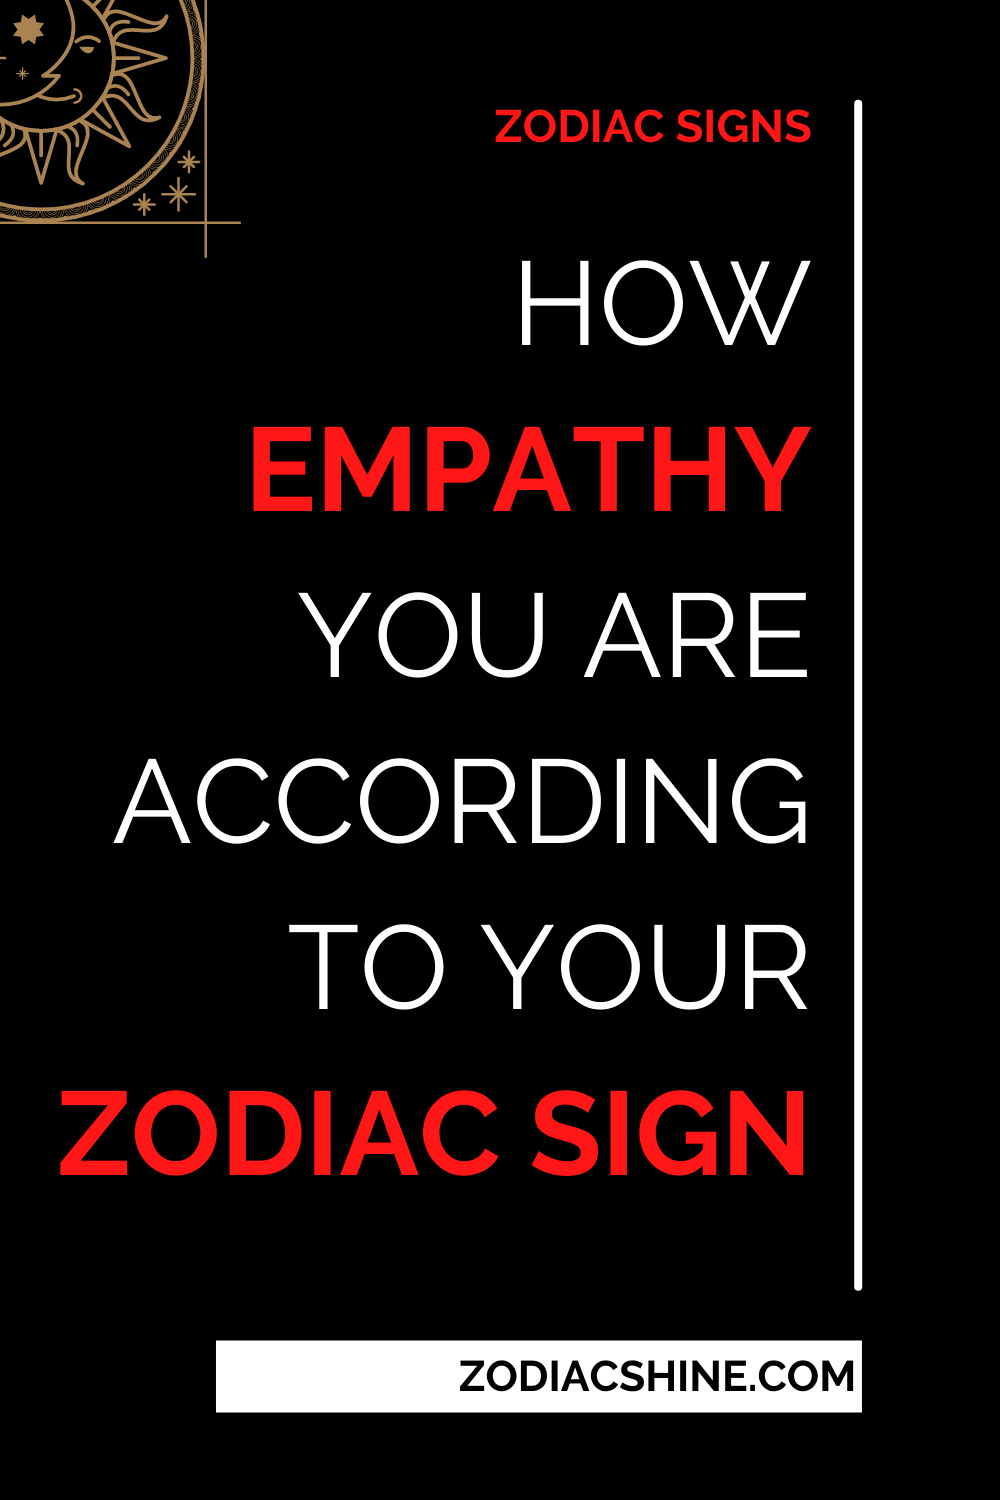 How Empathy You Are According To Your Zodiac Sign